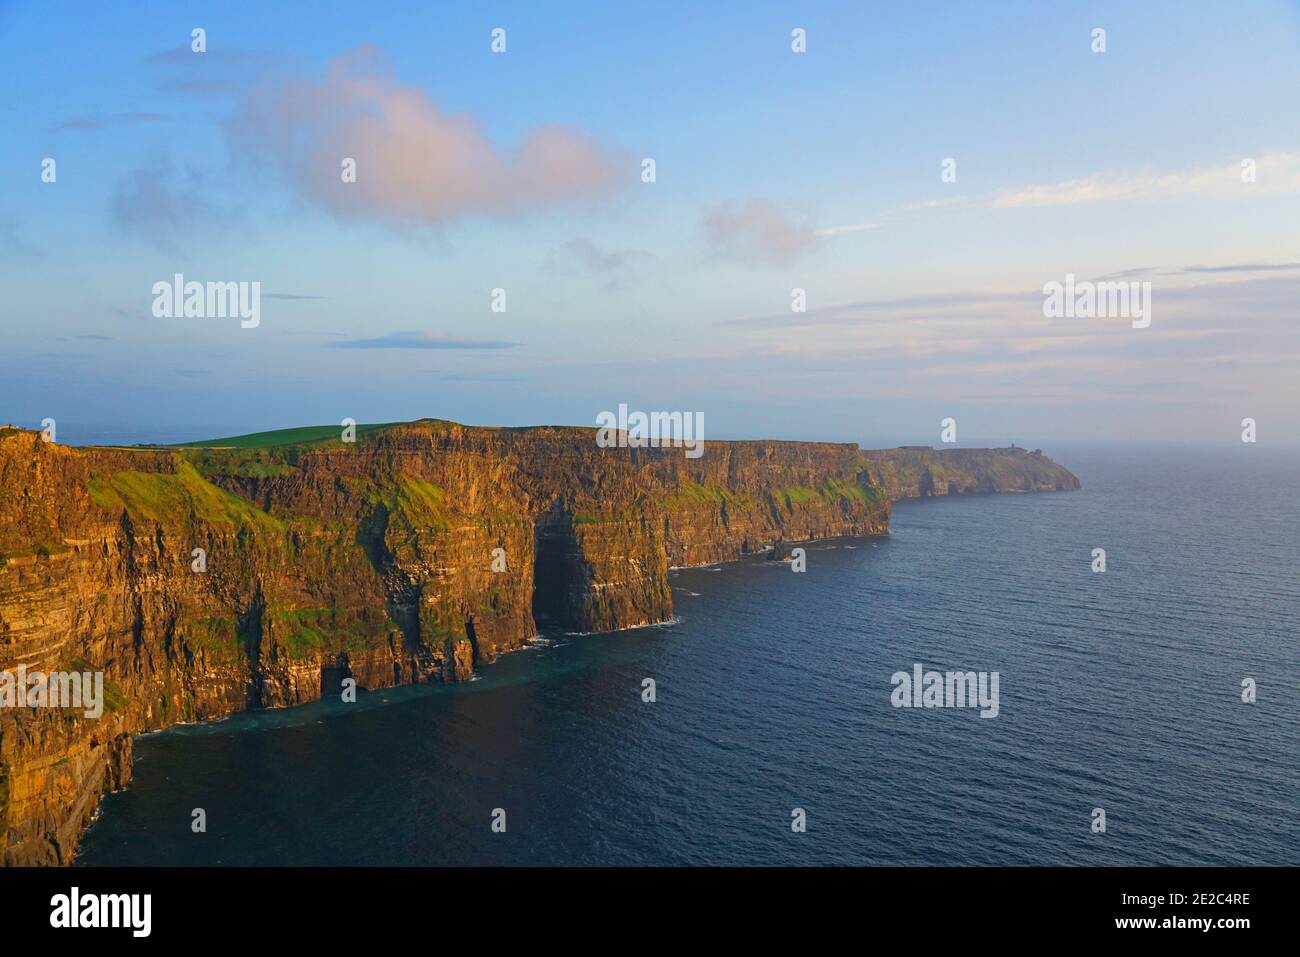 The Cliffs of Moher at sunset in County Clare, Ireland. Stock Photo